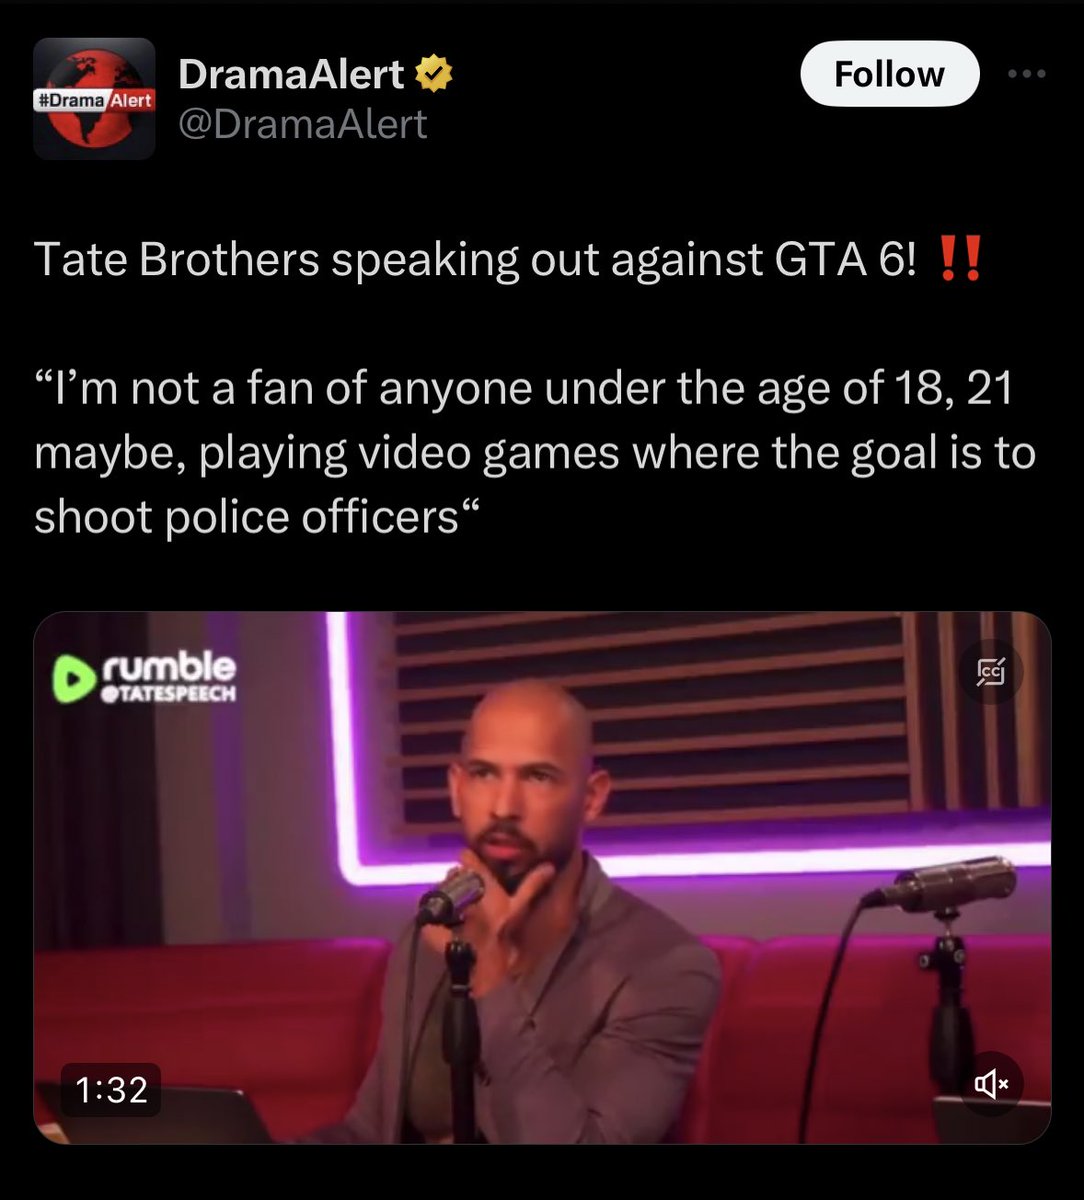 why is a living breathing GTA character lecturing us on video game violence like its 2003